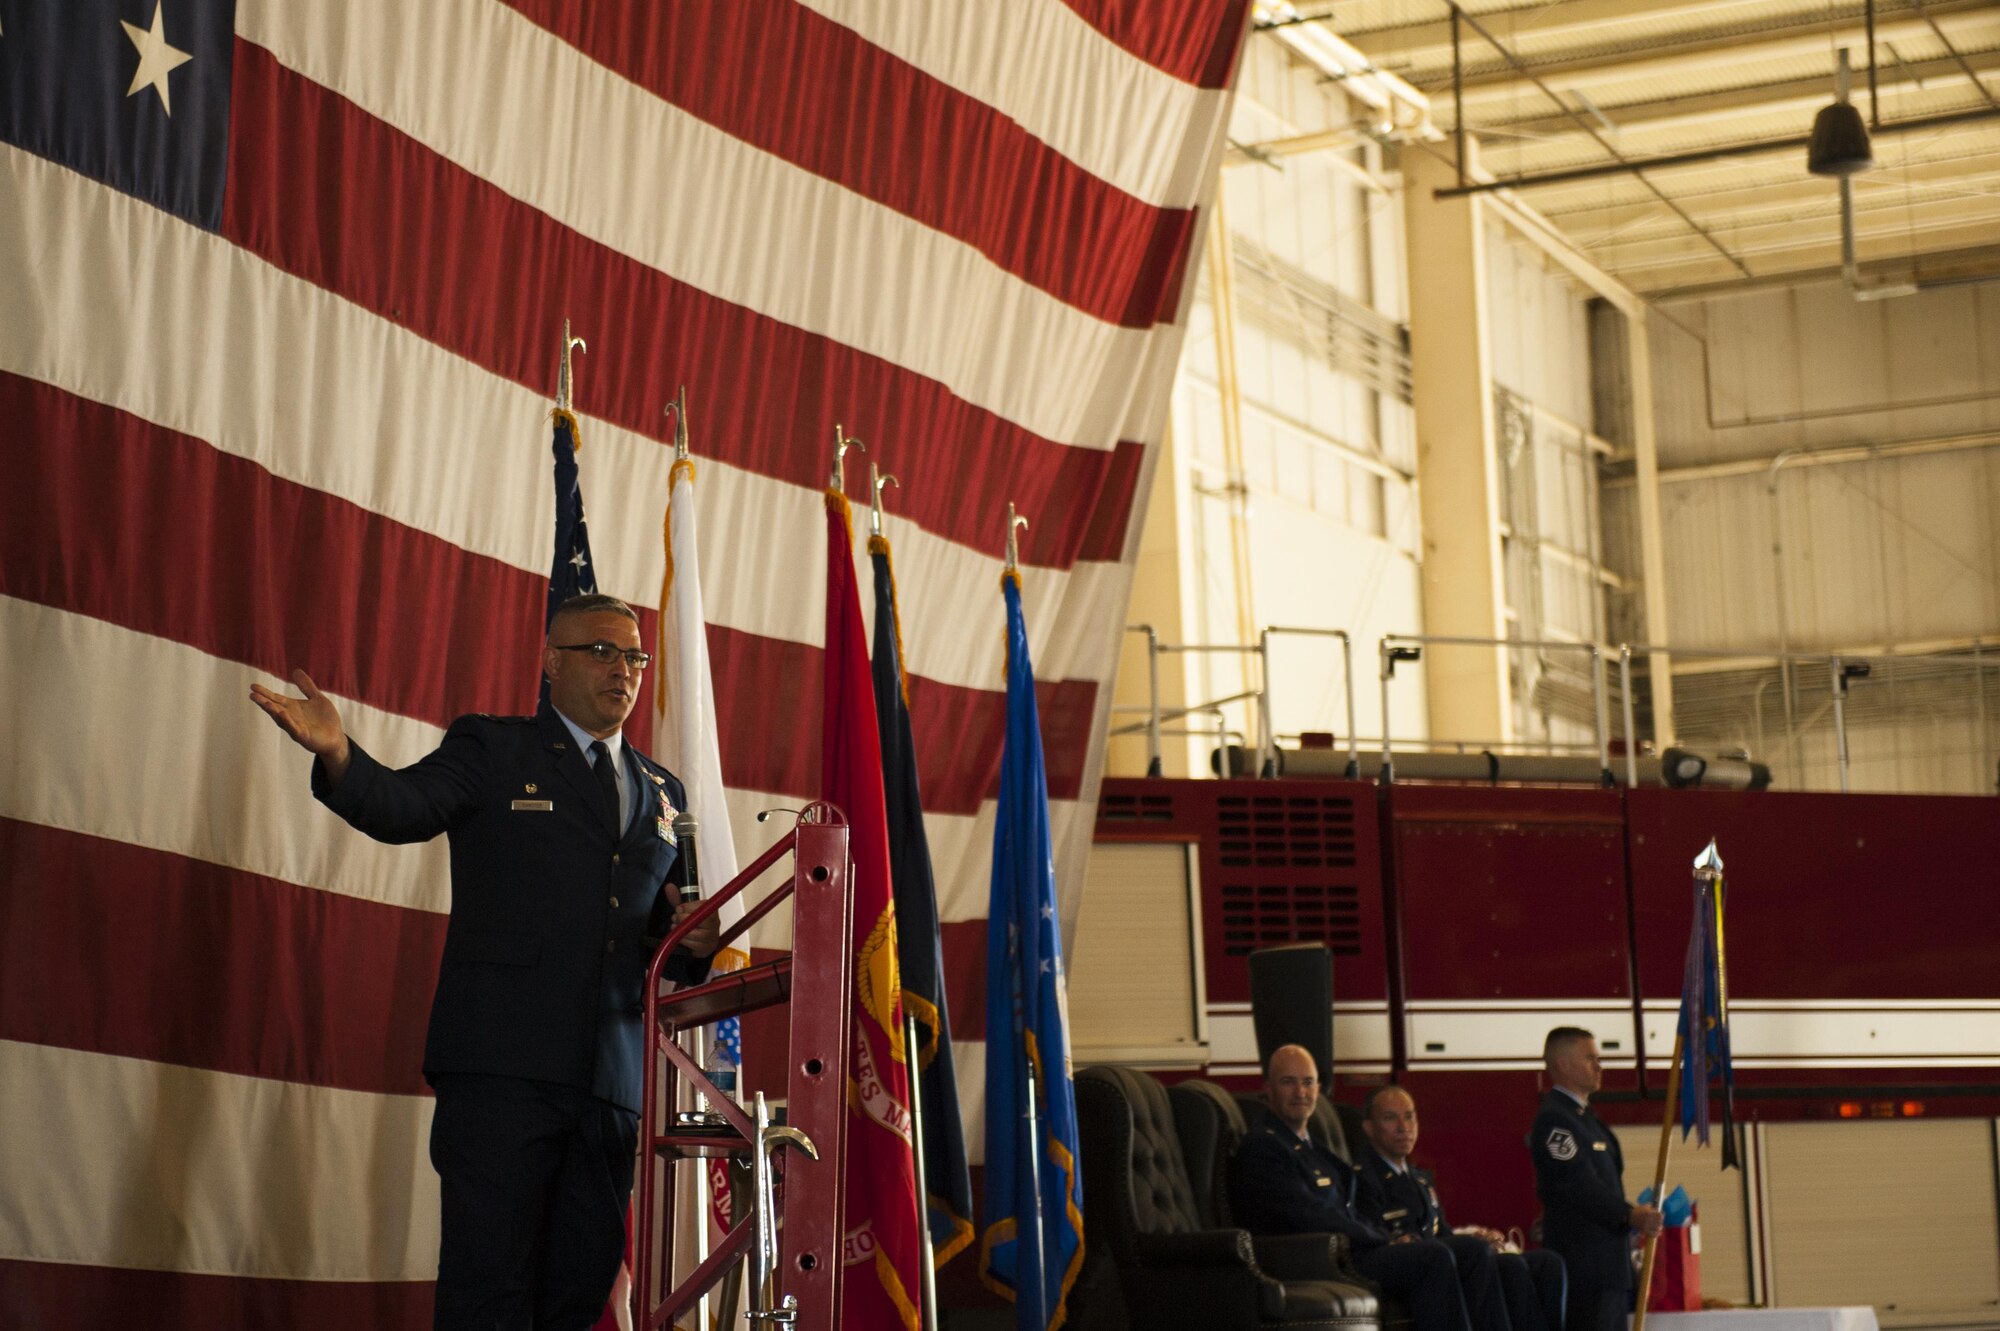 U.S. Air Force Col. Alejandro Ganster, 17th Training Group Commander, speaks during the 312th Training Squadron change of command ceremony at the Louis F. Garland Department of Defense Fire Academy High Bay, July 10, 2017. The 312th TRS welcomed Lt. Col. Scott D. Cline as the new Commander. (U.S. Air Force photo by Senior Airman Scott Jackson/released)